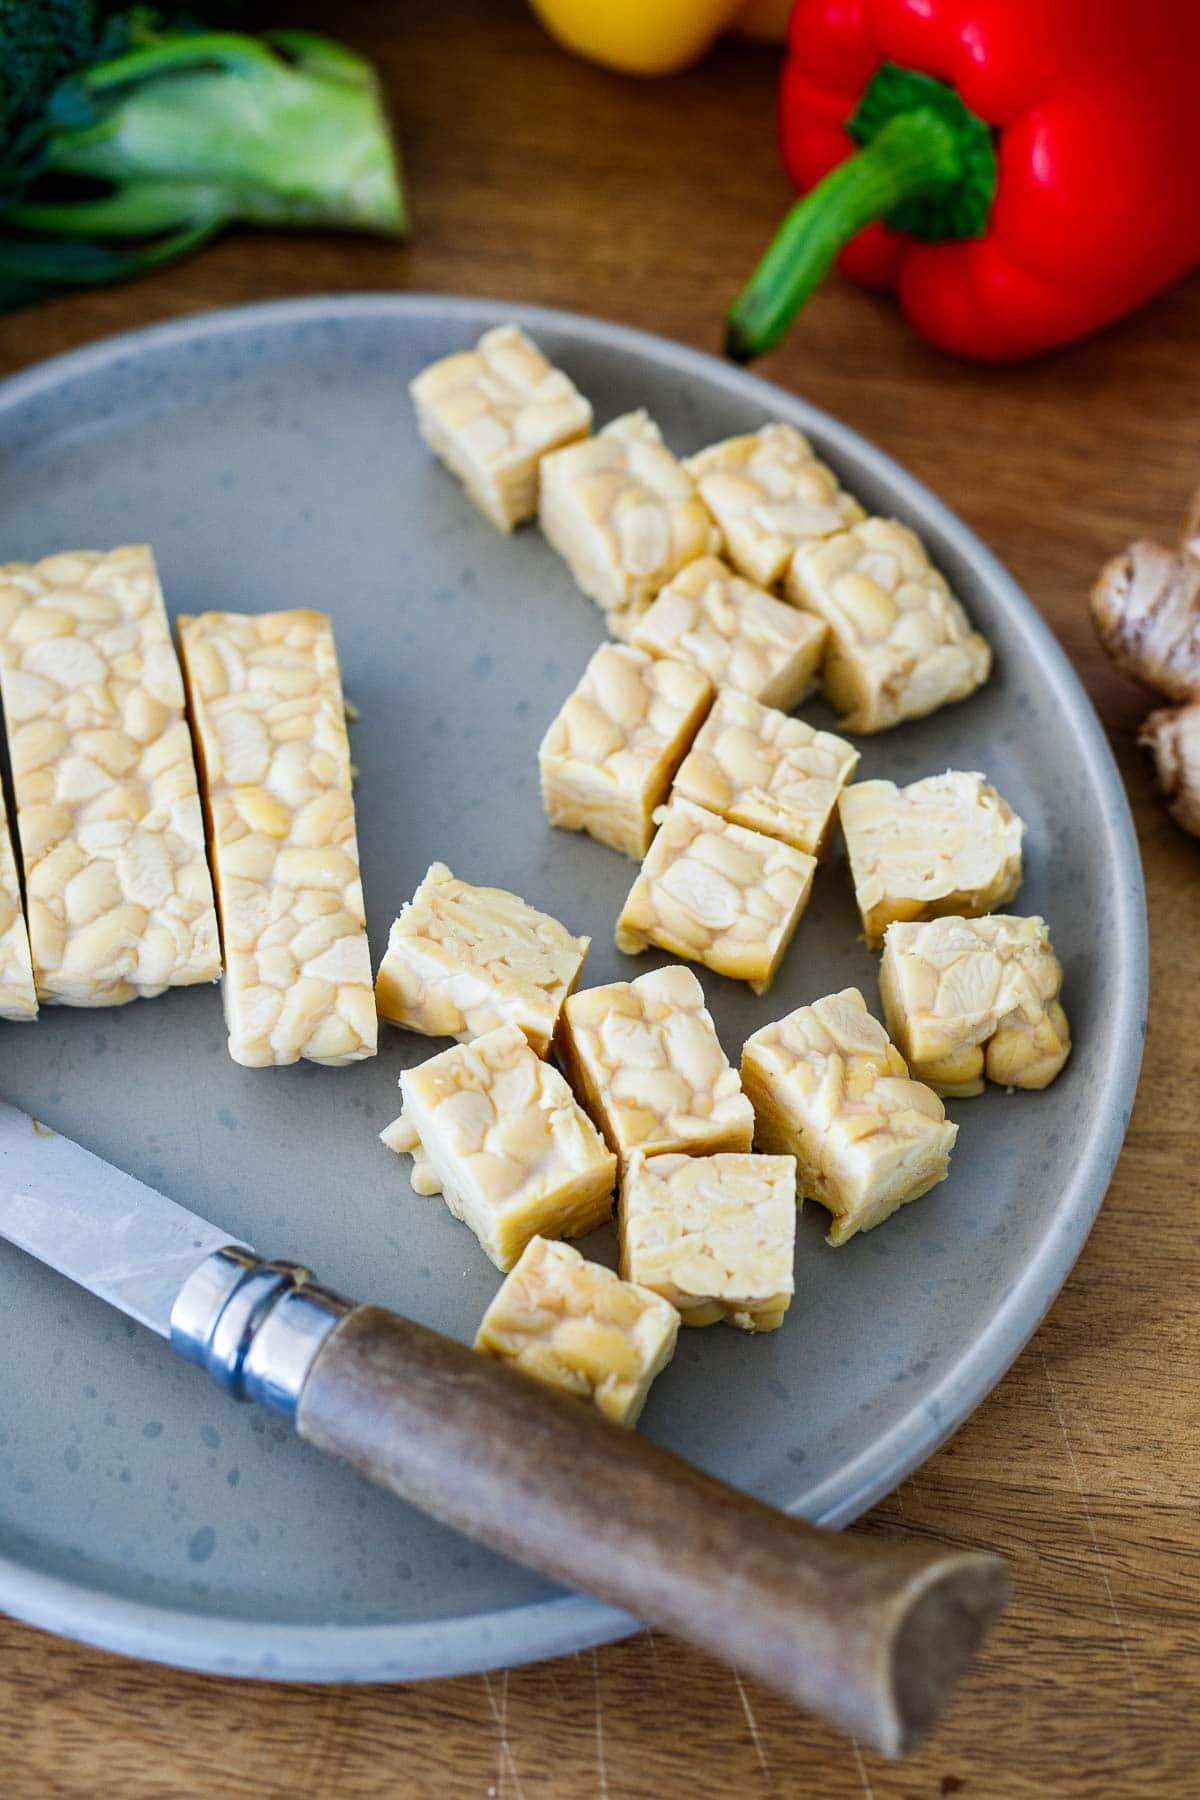 tempeh cubed on plate with knife.